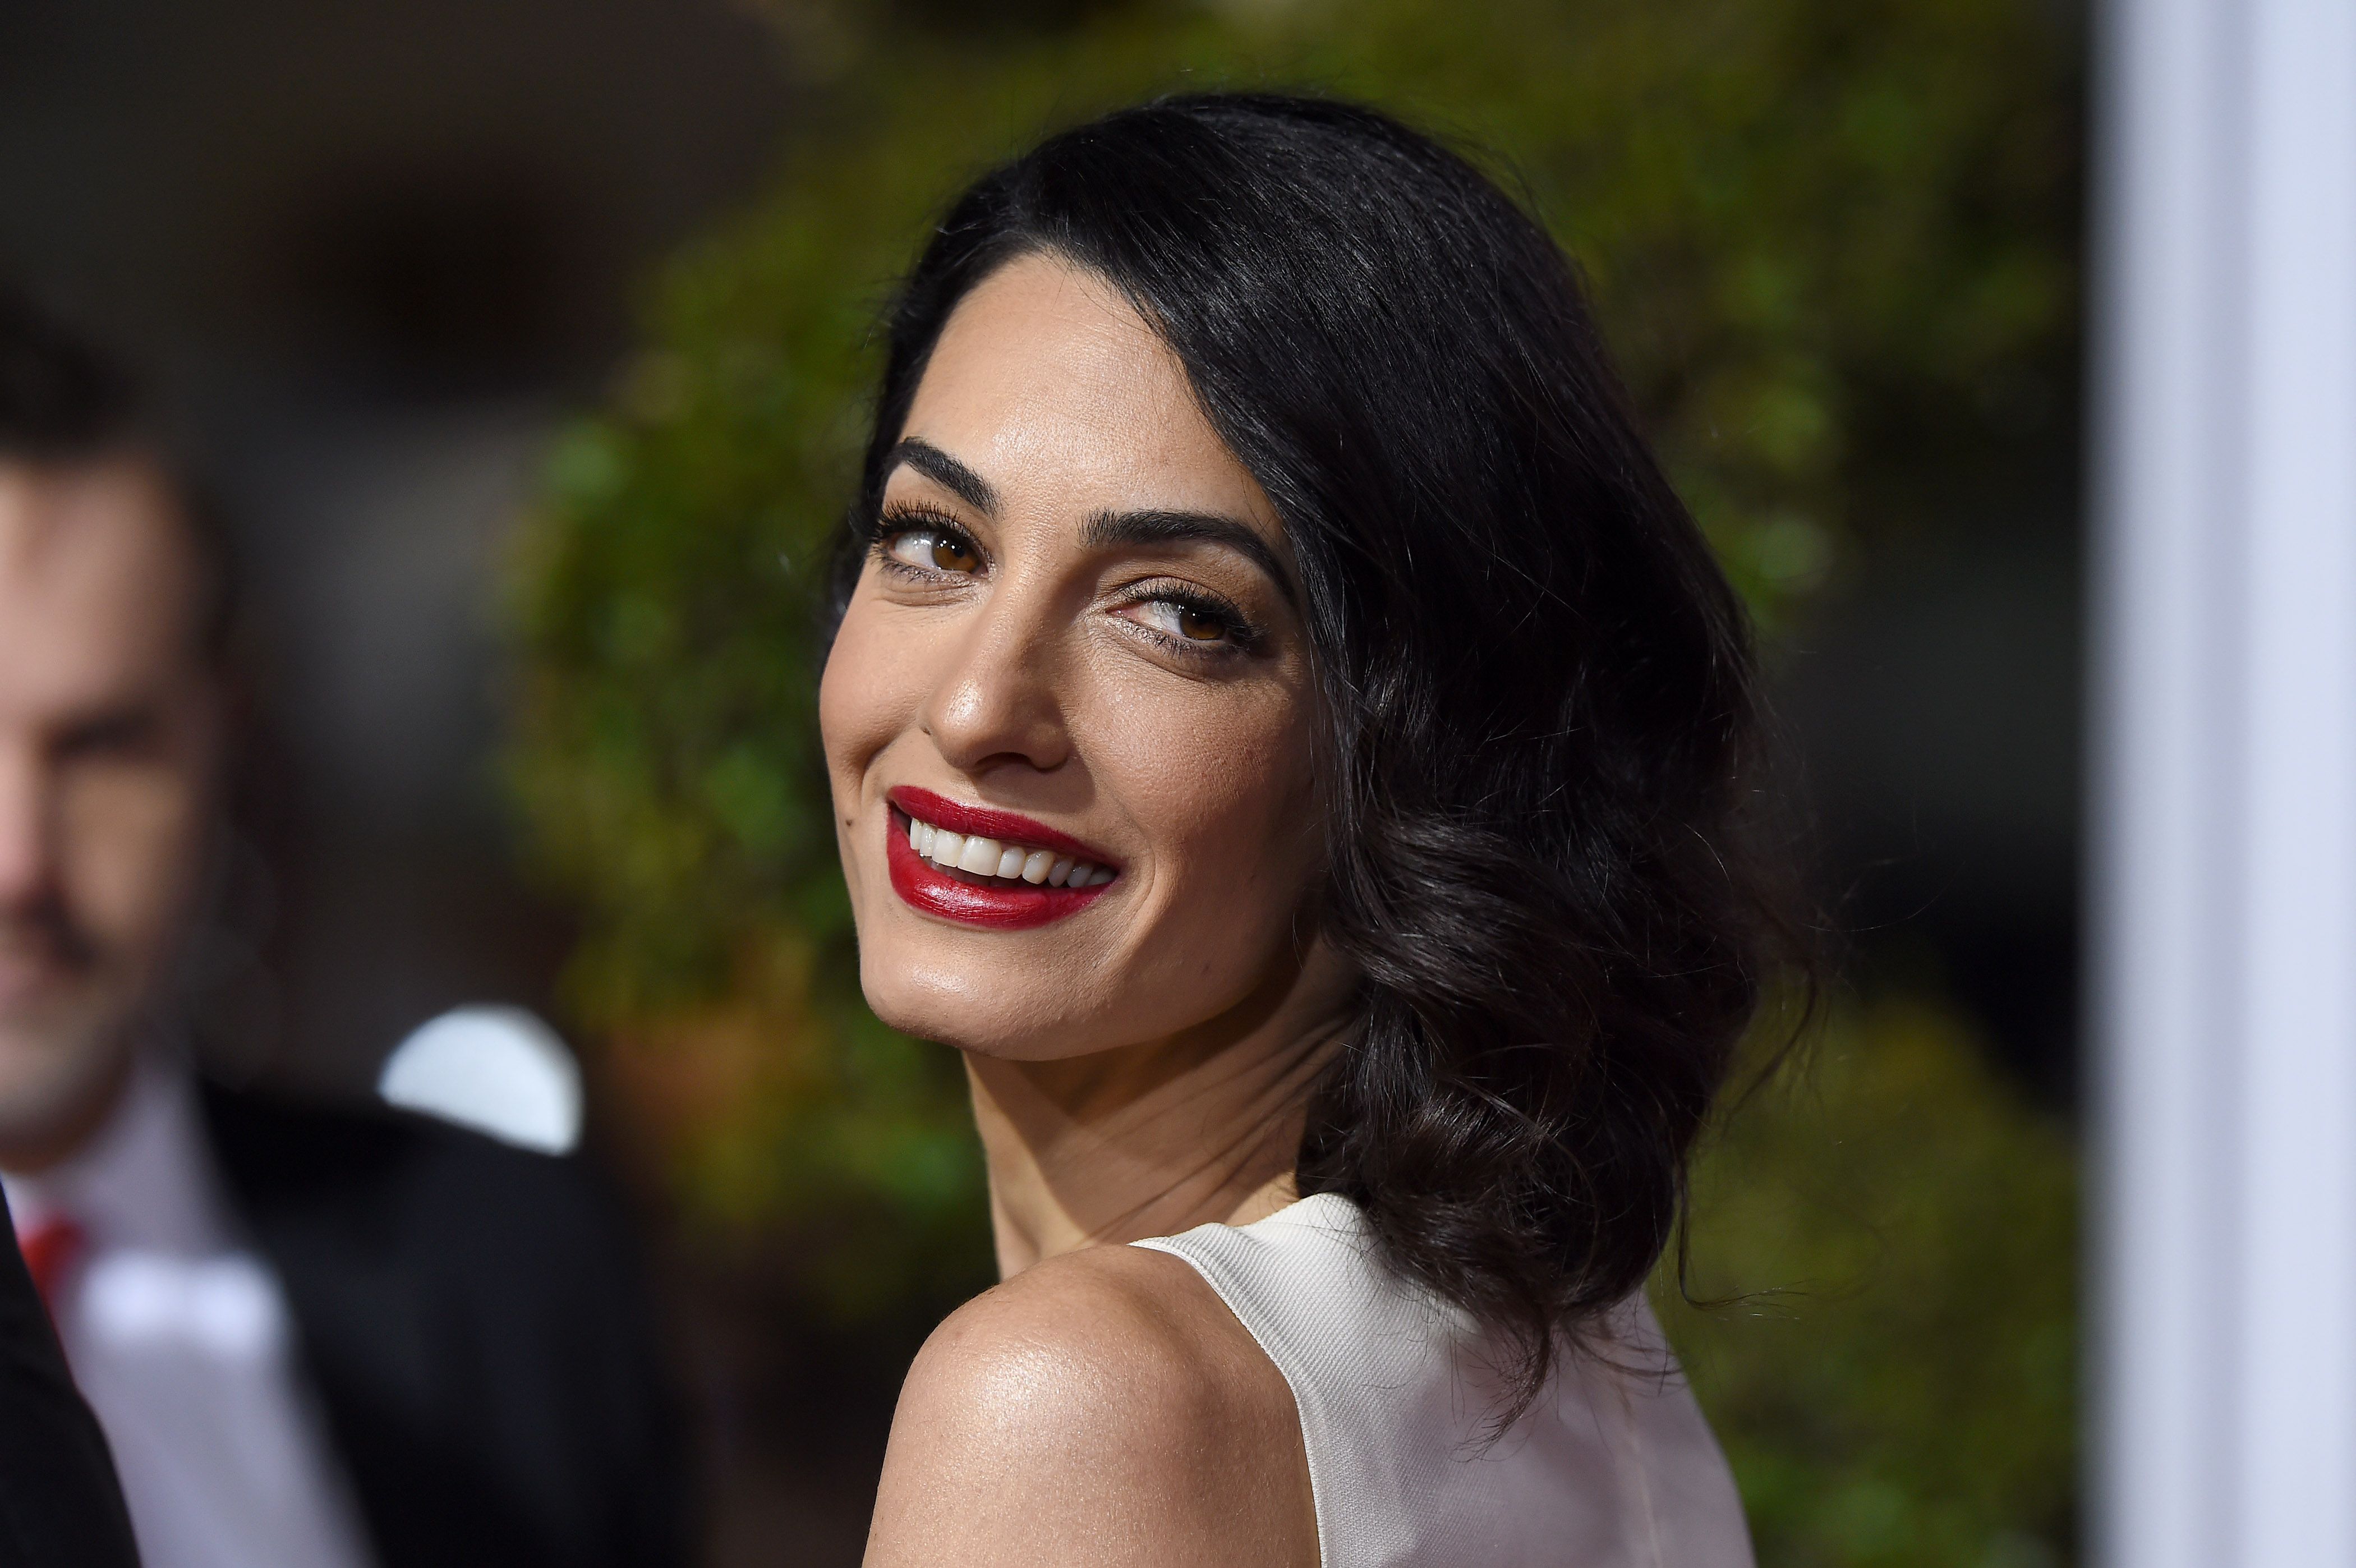 Amal Clooney's latest hair transformation is the brunette inspiration we need